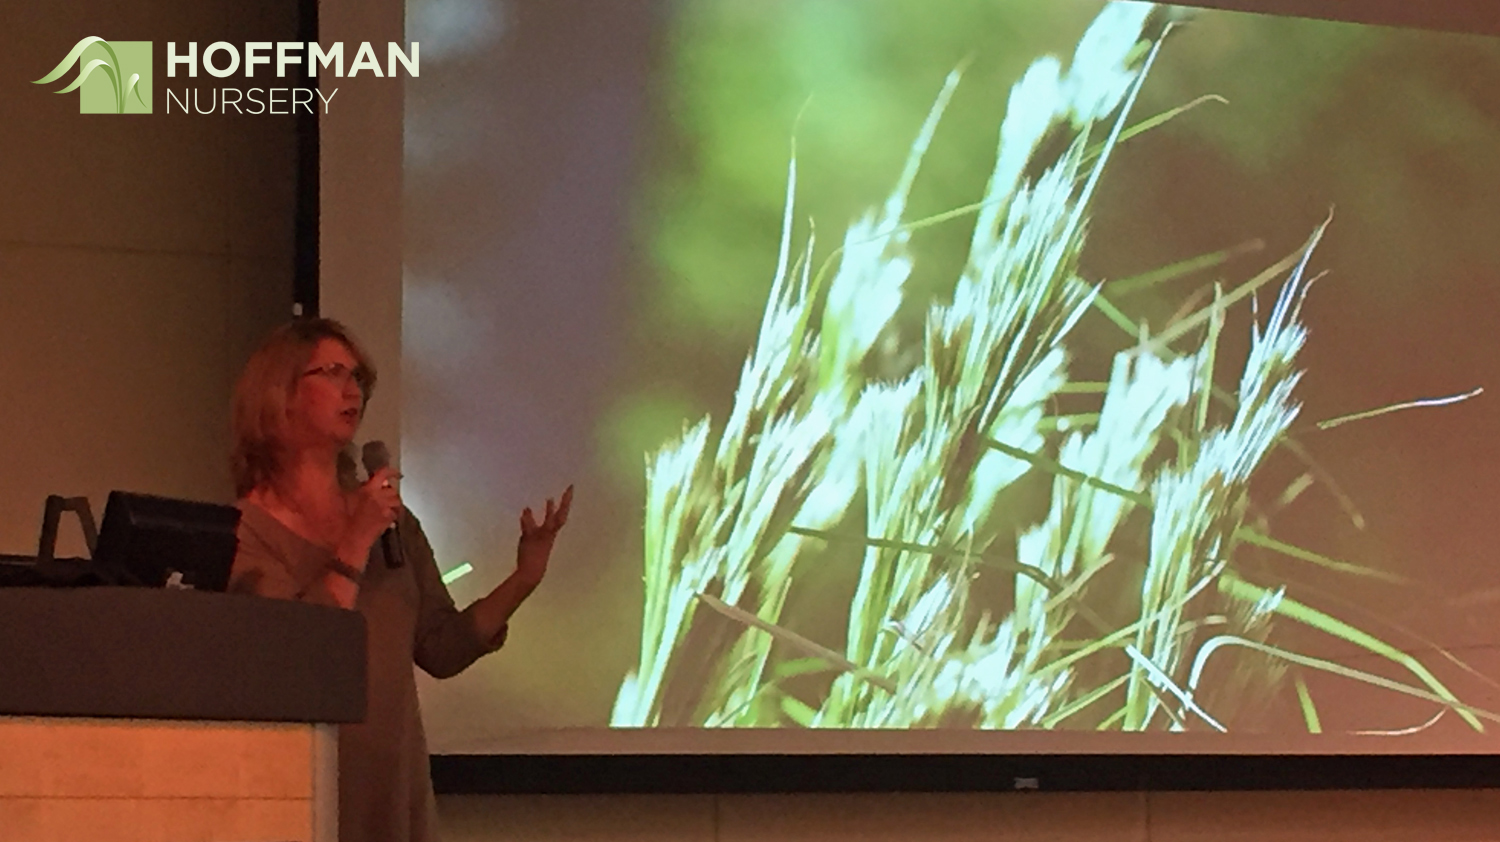 Our Marketing Director Shannon Currey talked about native grasses and sedges, focusing on the important role they play in building today's landscapes.